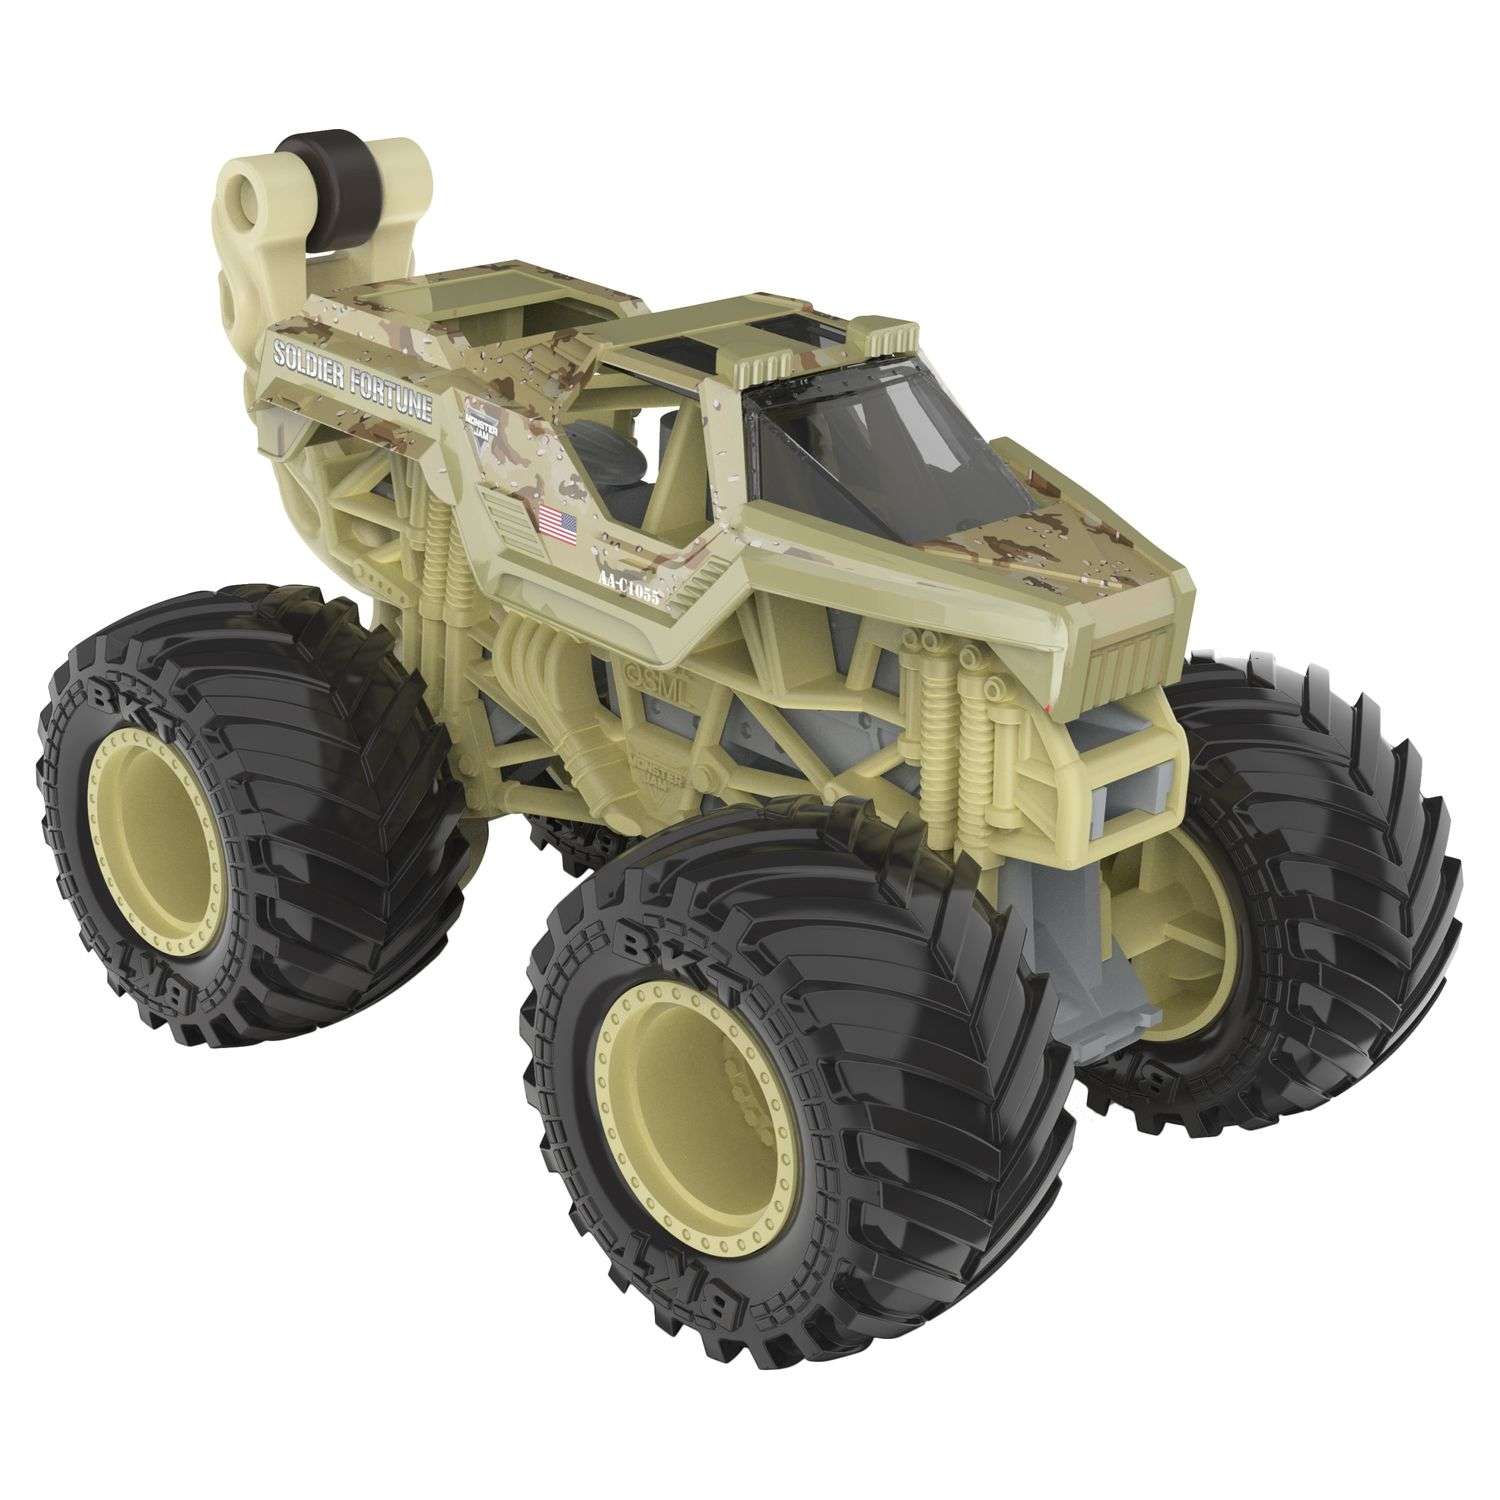 Машинка Monster Jam 1:64 Soldier of Fortune 6060868 6060868 - фото 1